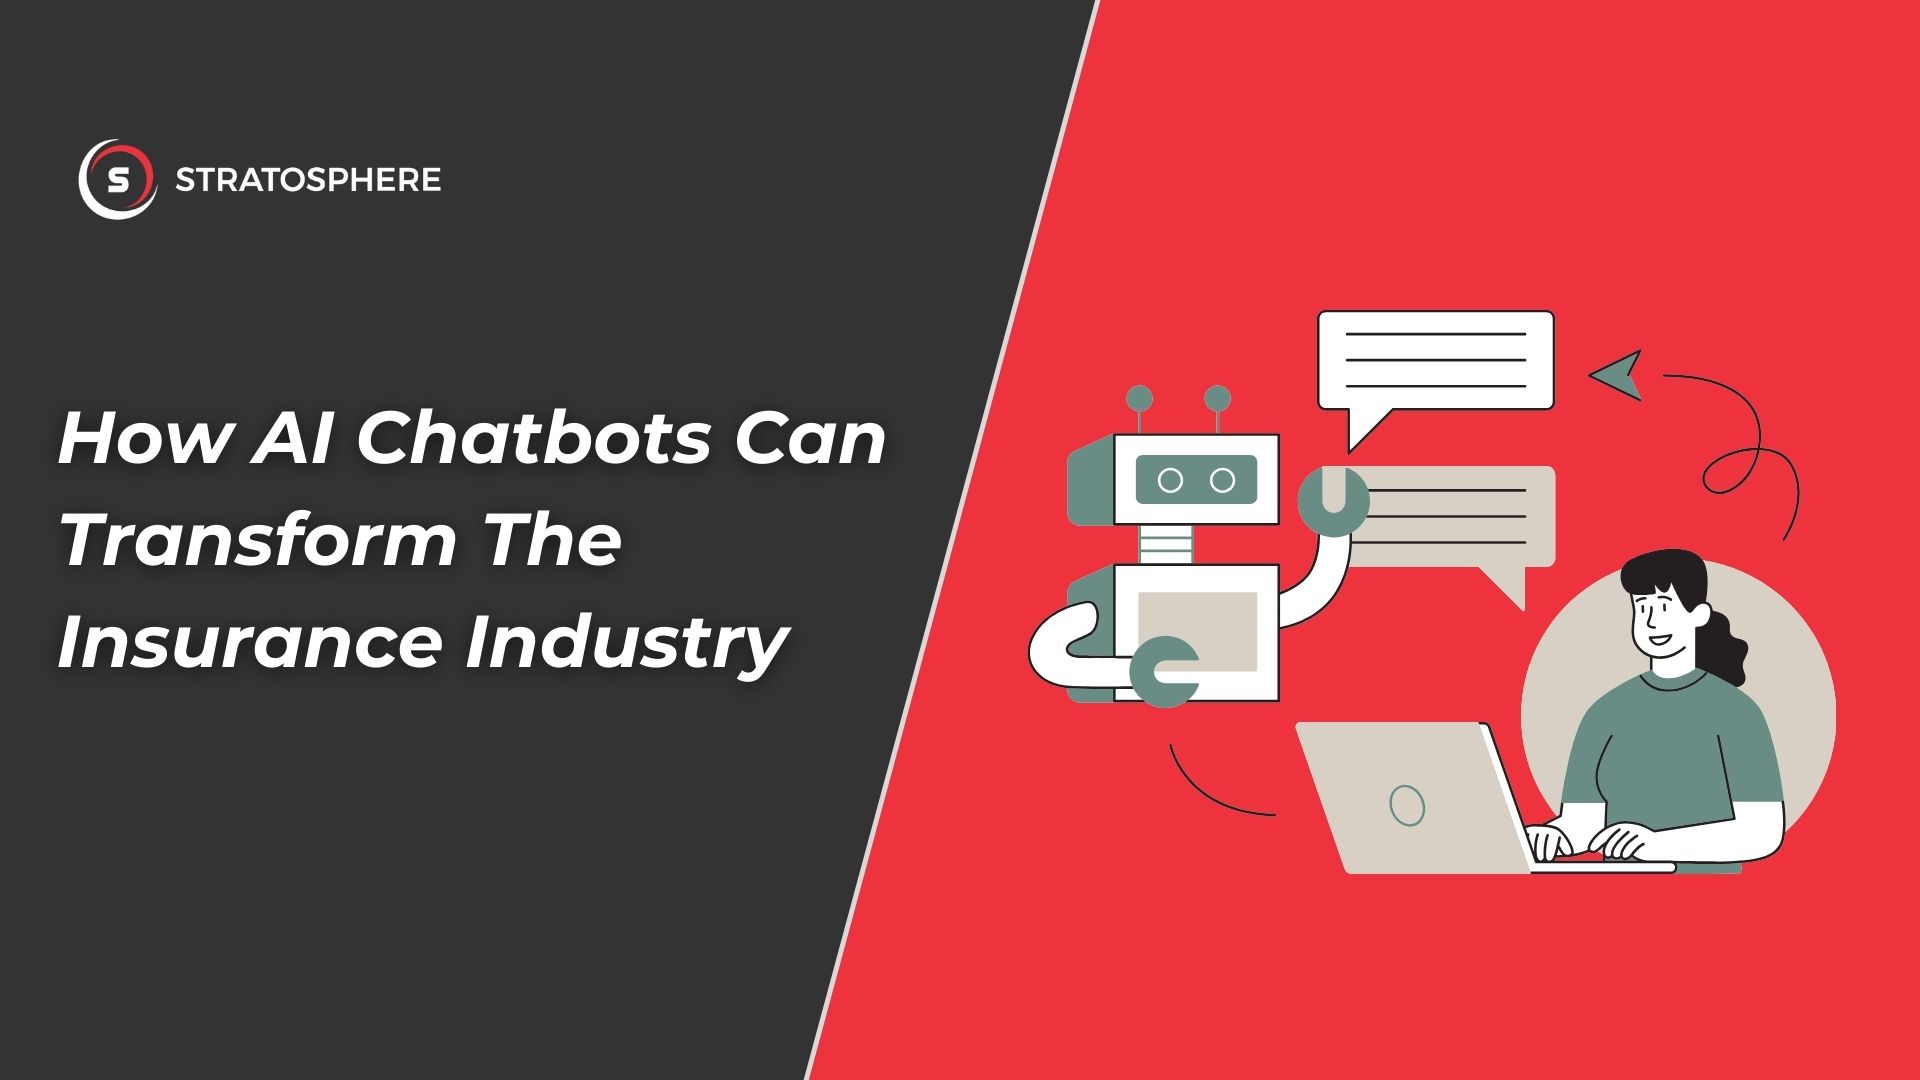 How AI Chatbots Can Transform The Insurance Industry